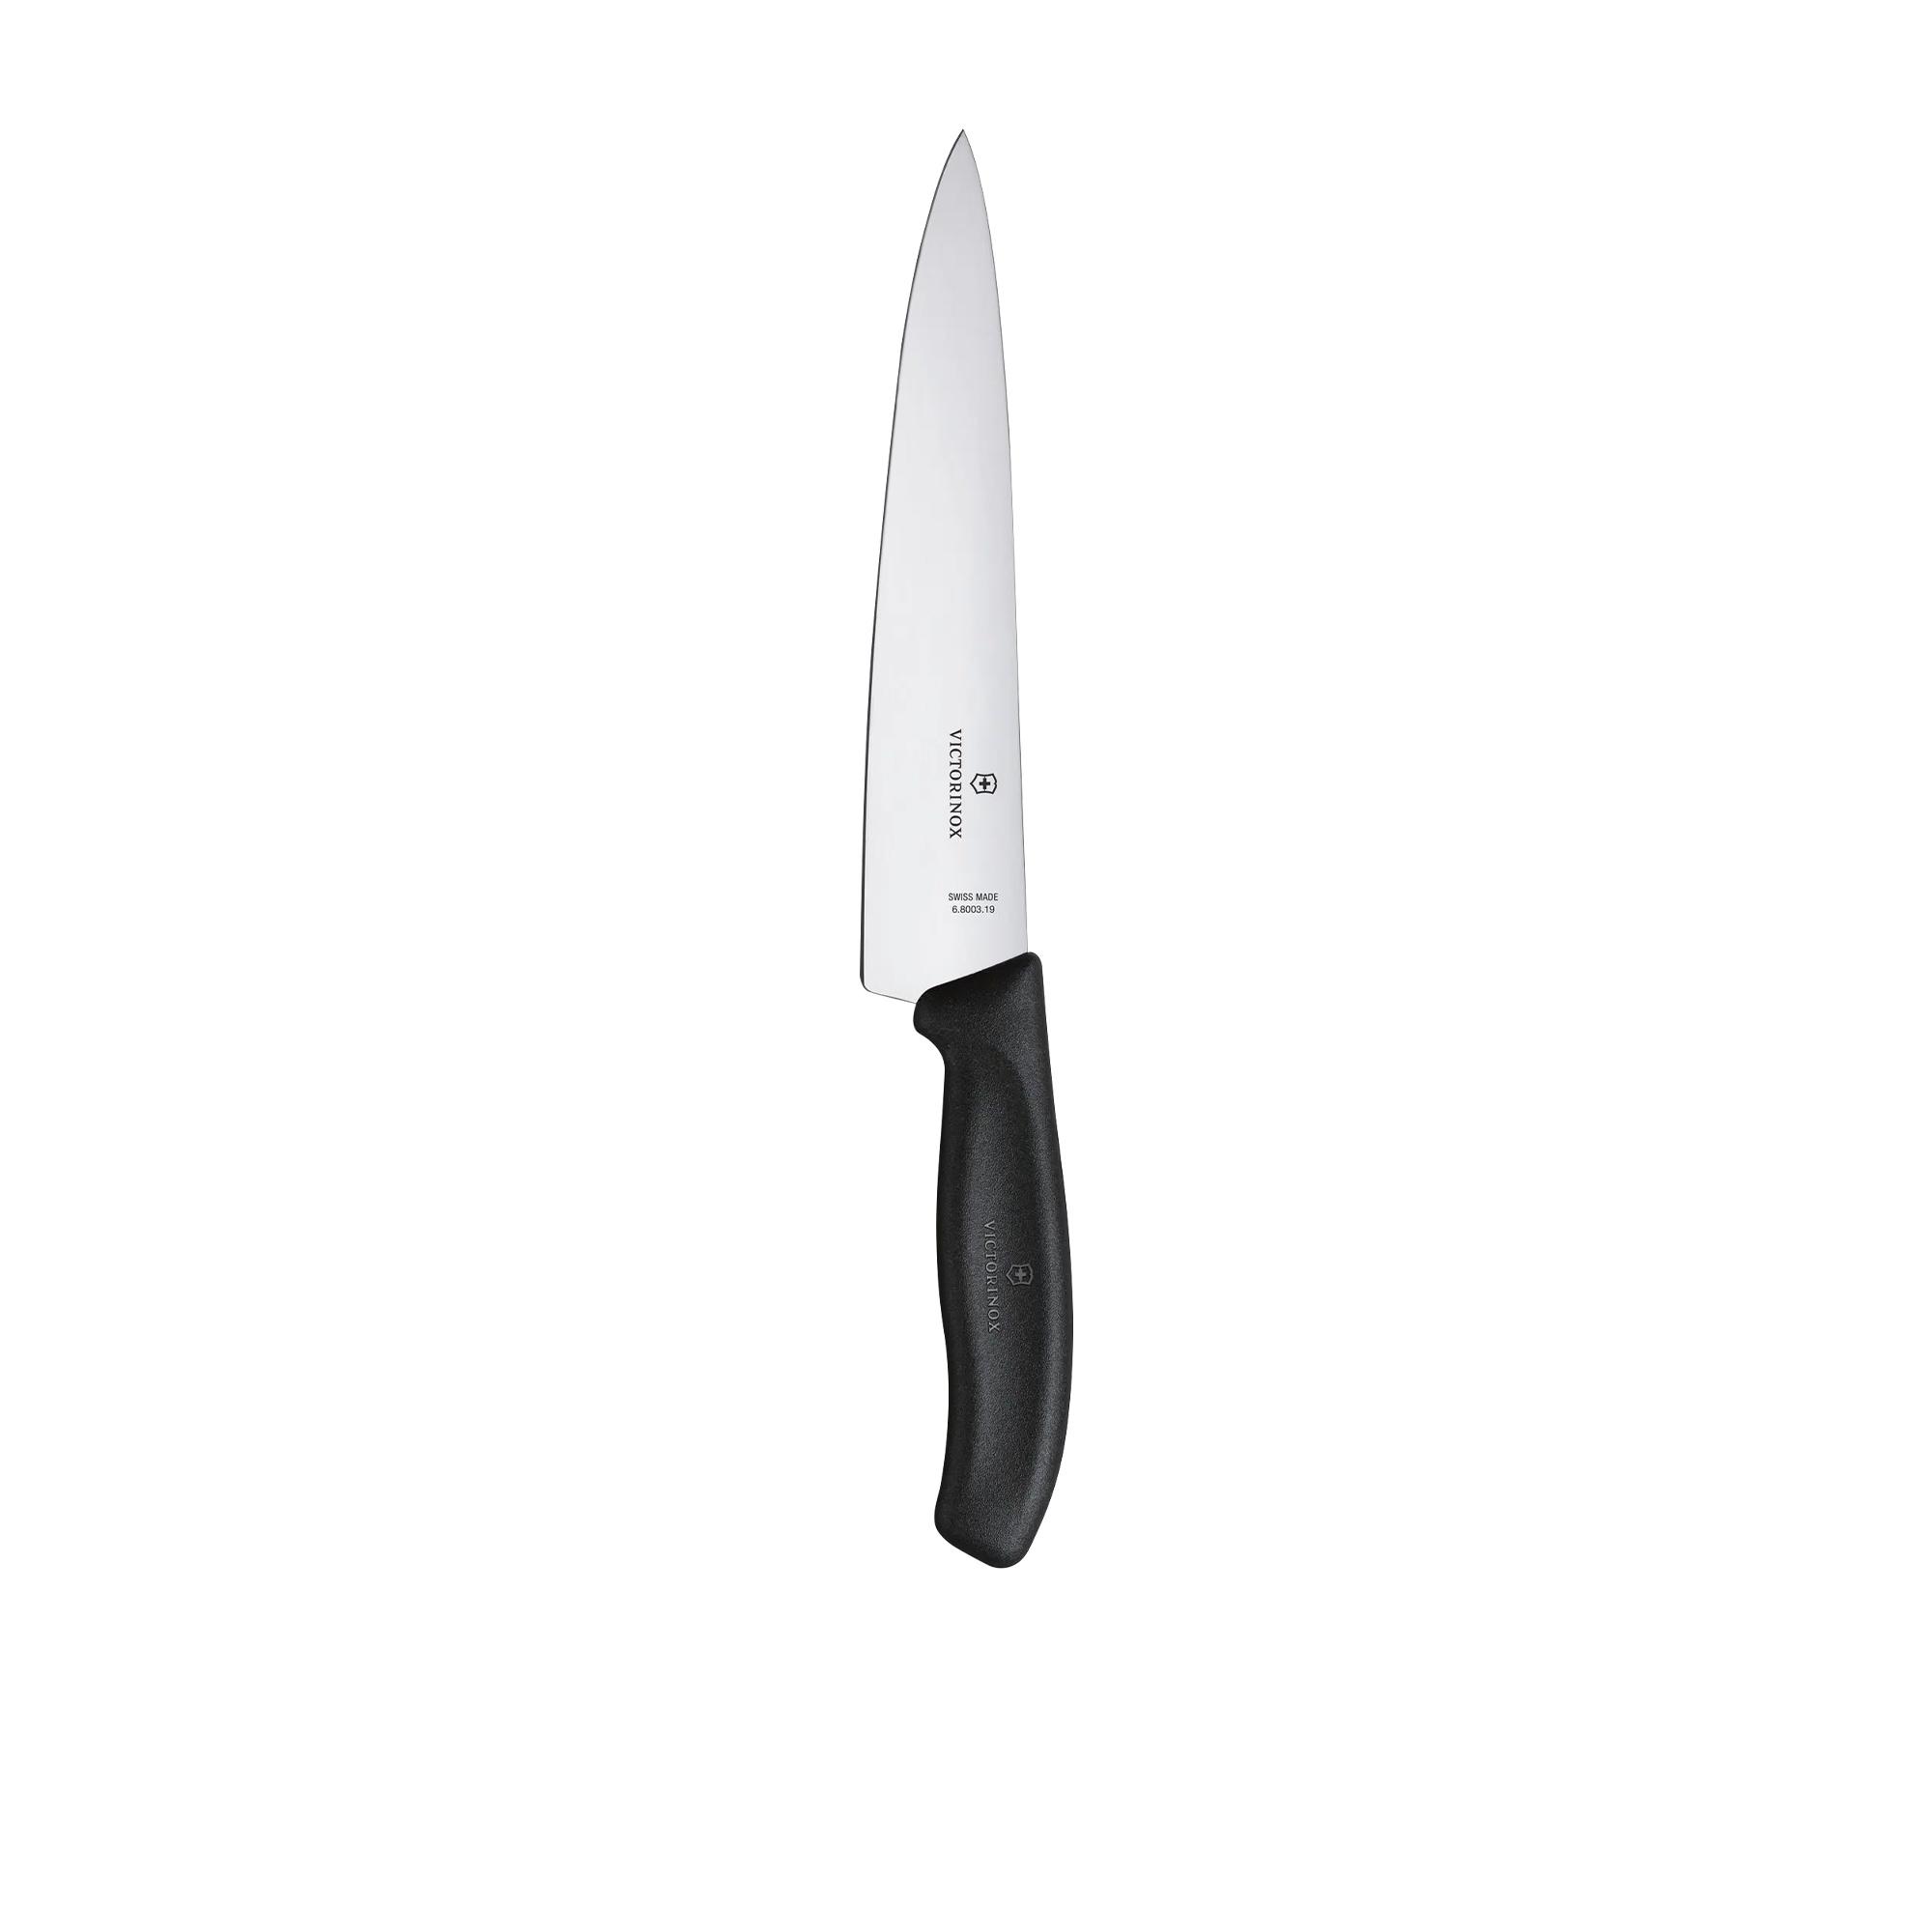 Victorinox Classic 2pc Carving Knife Set Image 3